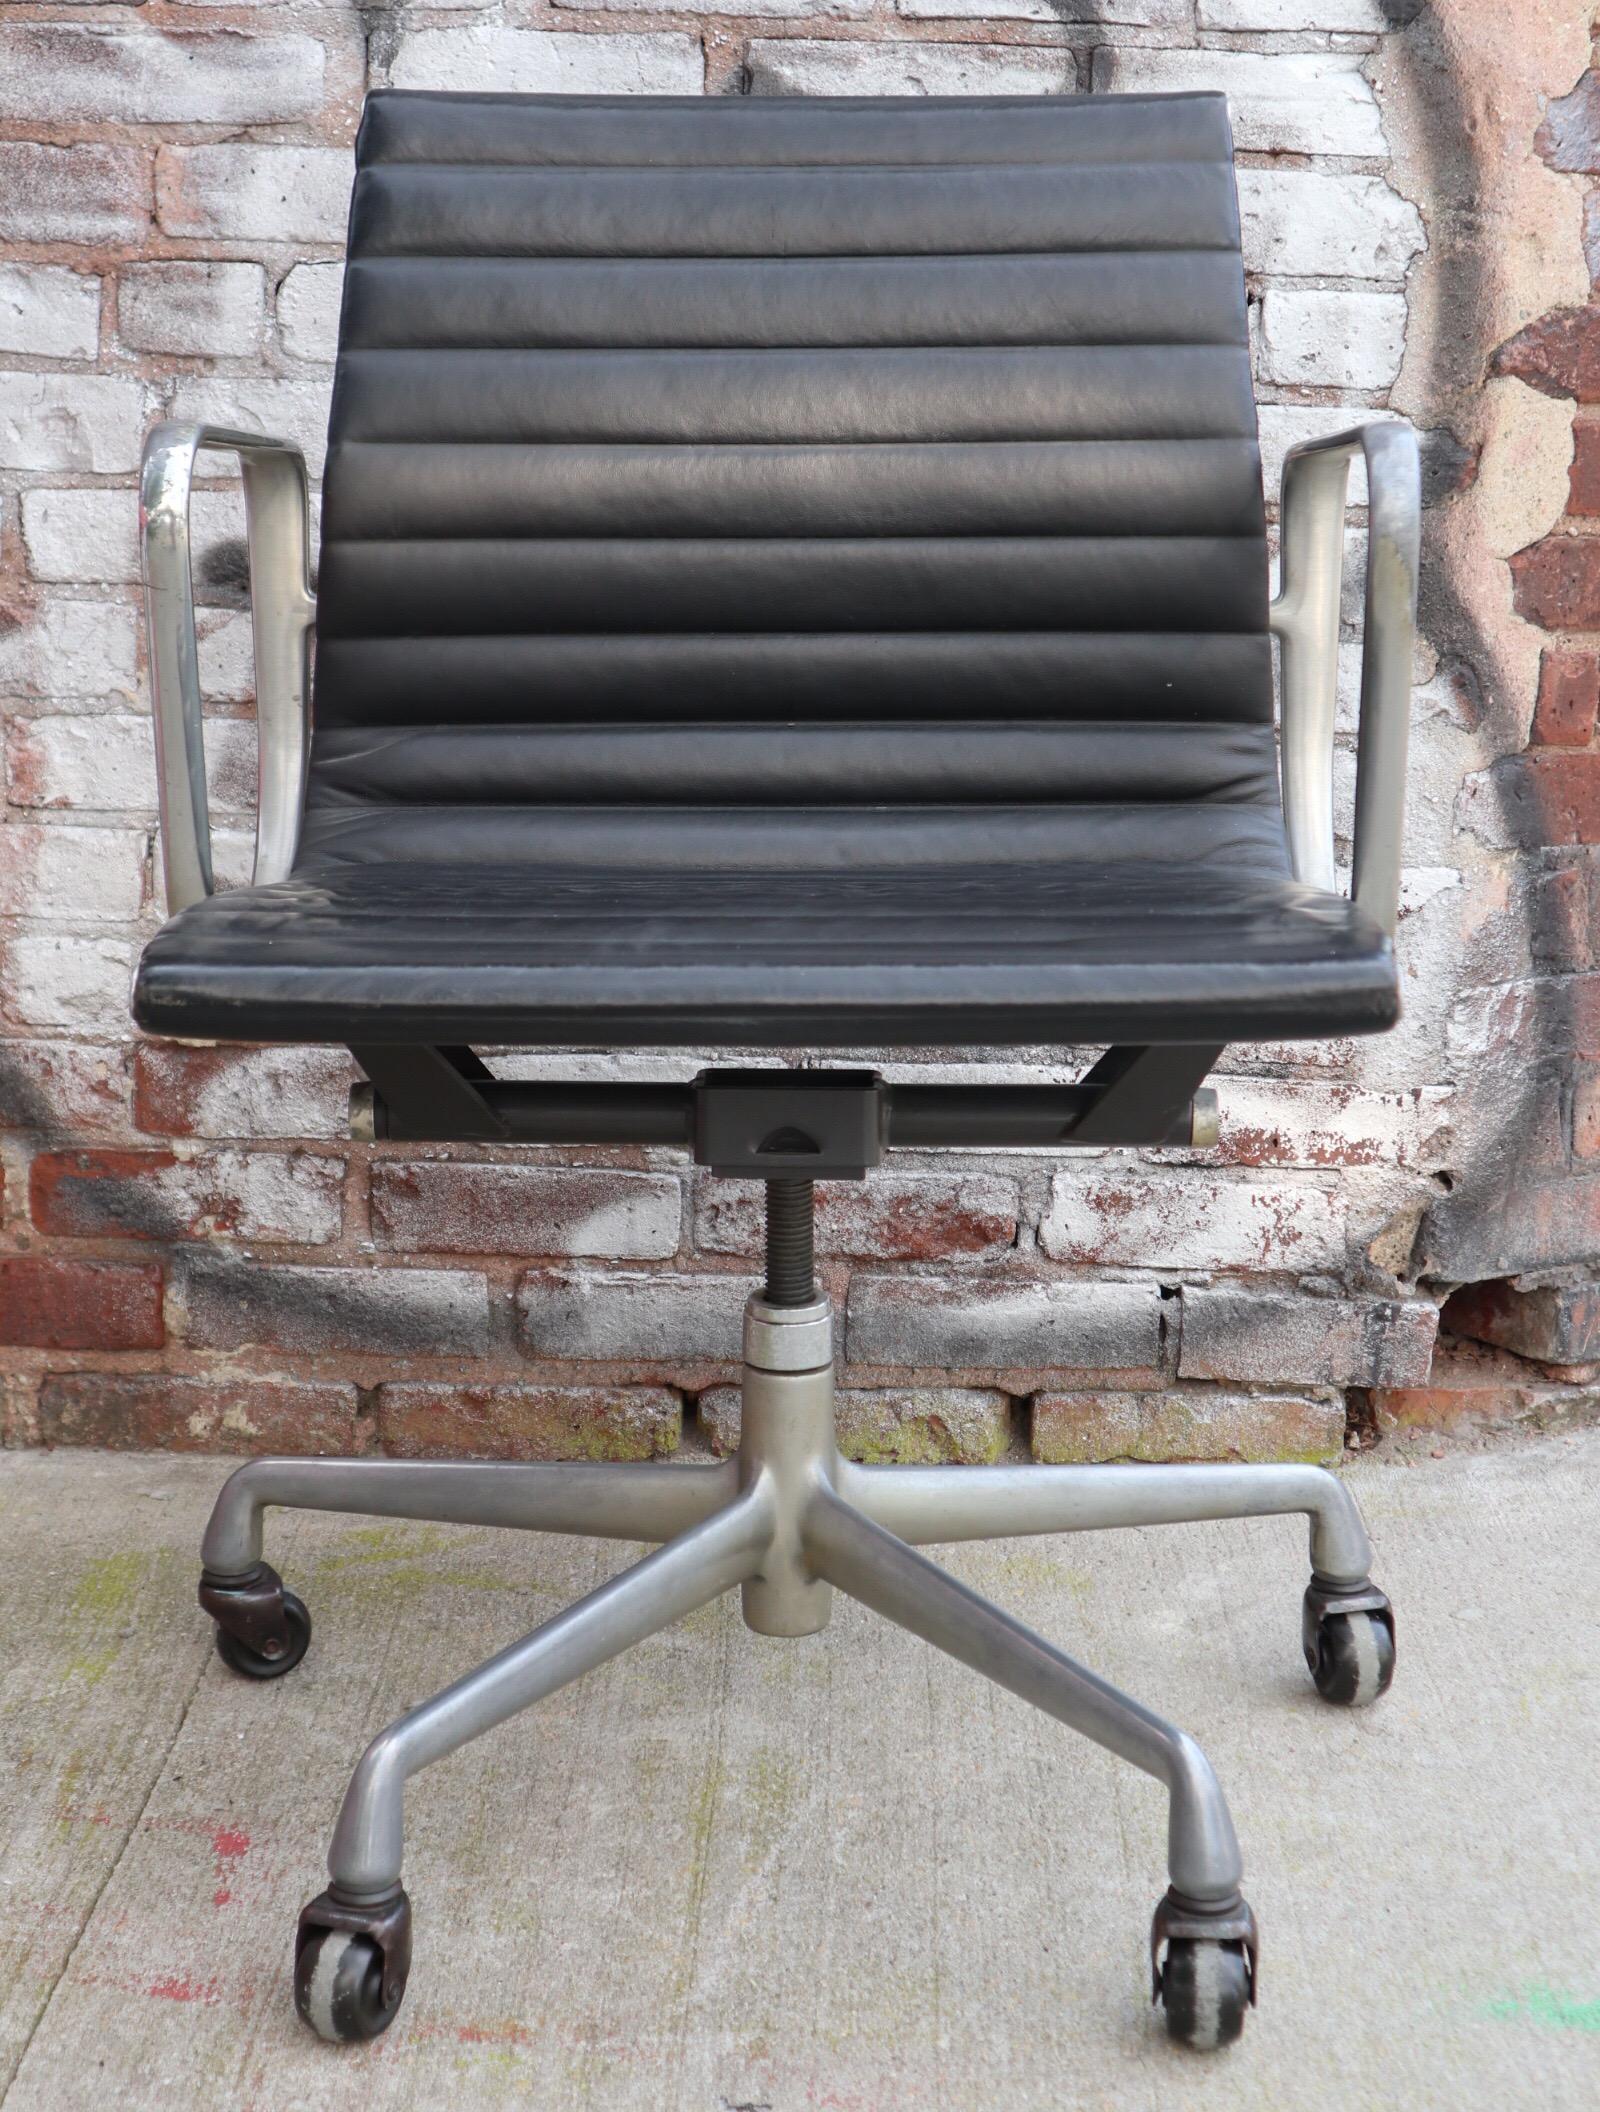 Gorgeous original Herman Miller Eames leather management. Polished aluminum frame with extremely comfortable leather sling seat. Arms with normal wear. Wheels work fine. Signed and stamped.